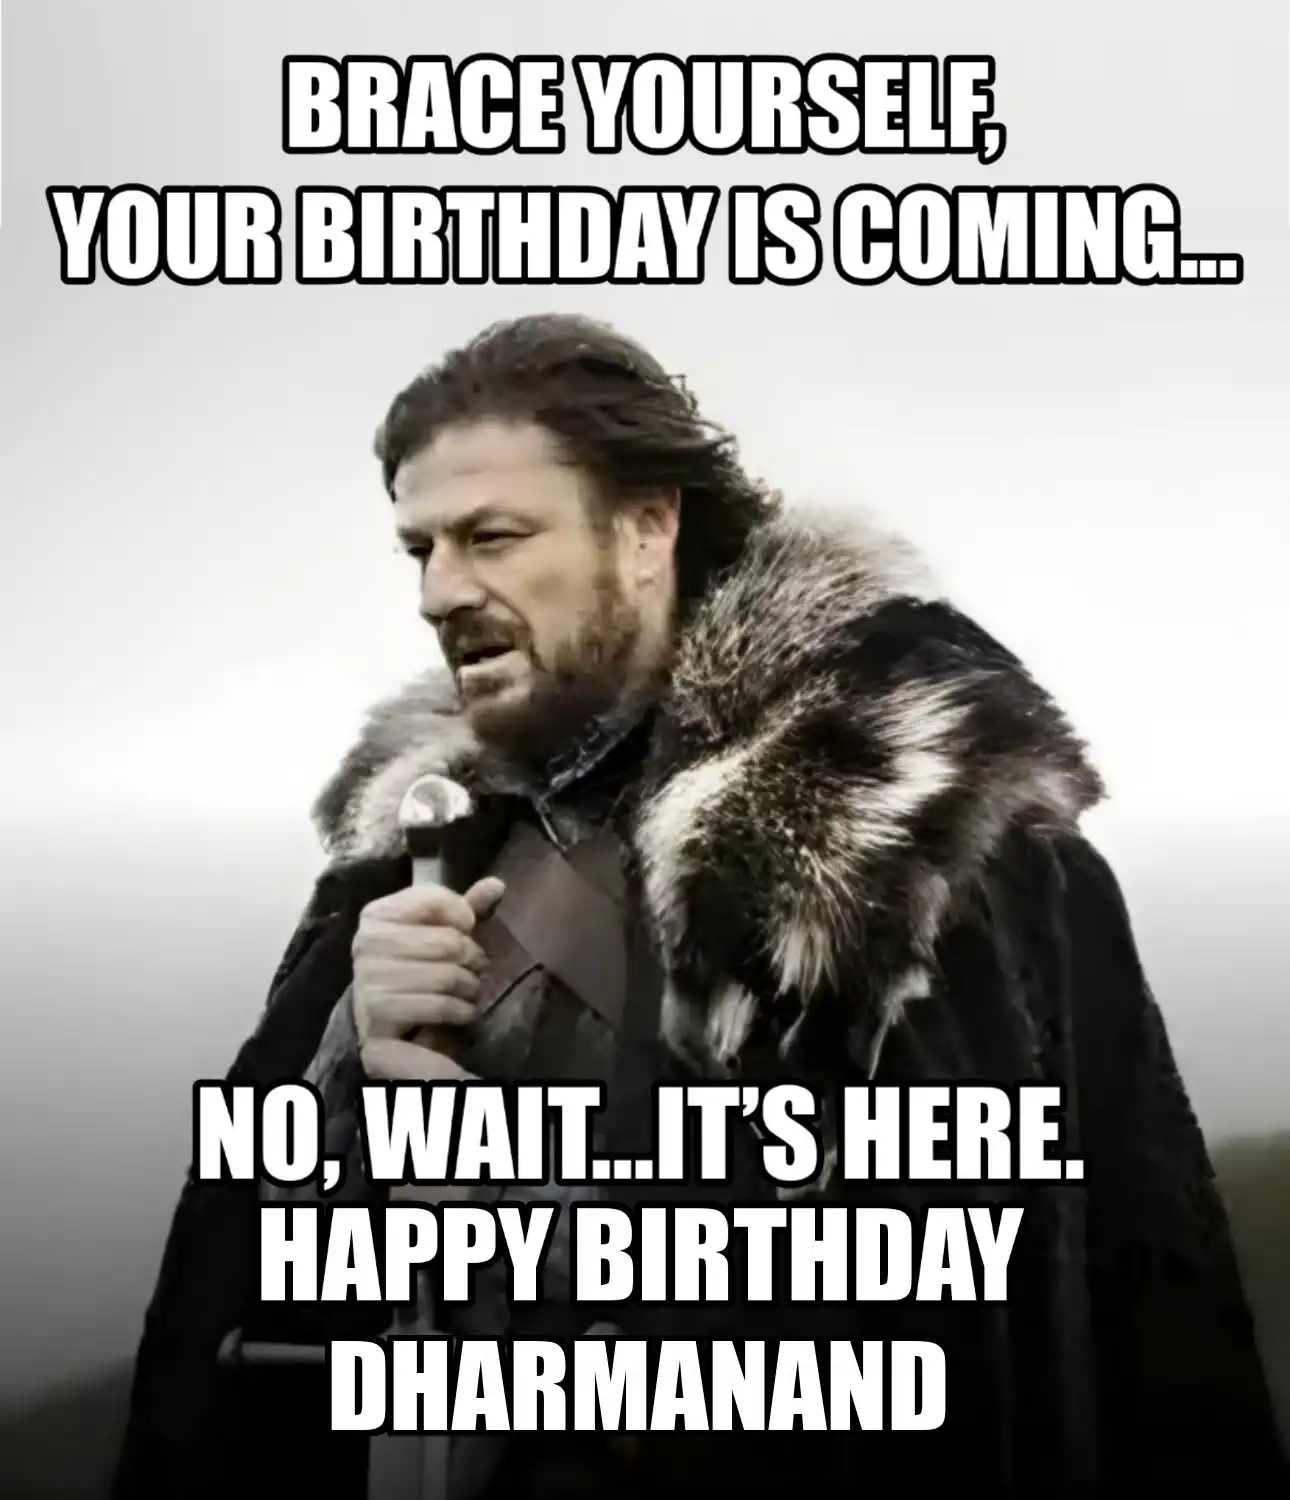 Happy Birthday Dharmanand Brace Yourself Your Birthday Is Coming Meme